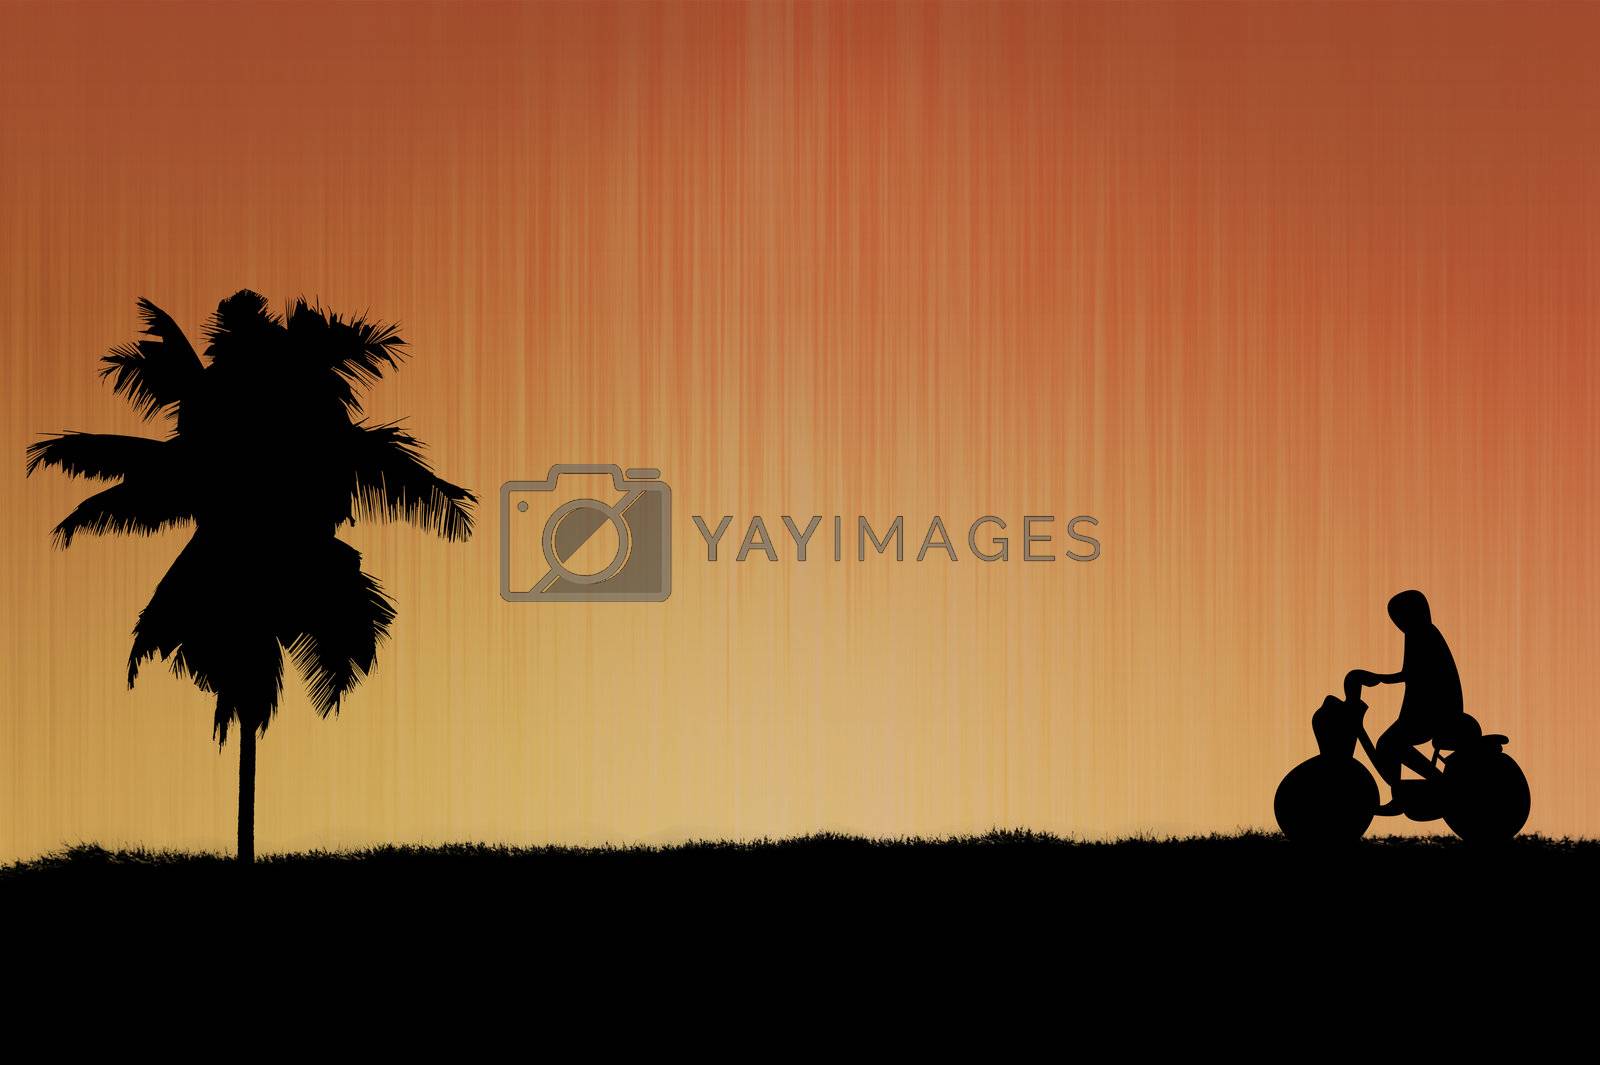 Royalty free image of Silhouette of Child with Bicycle on abstract background by jumpe